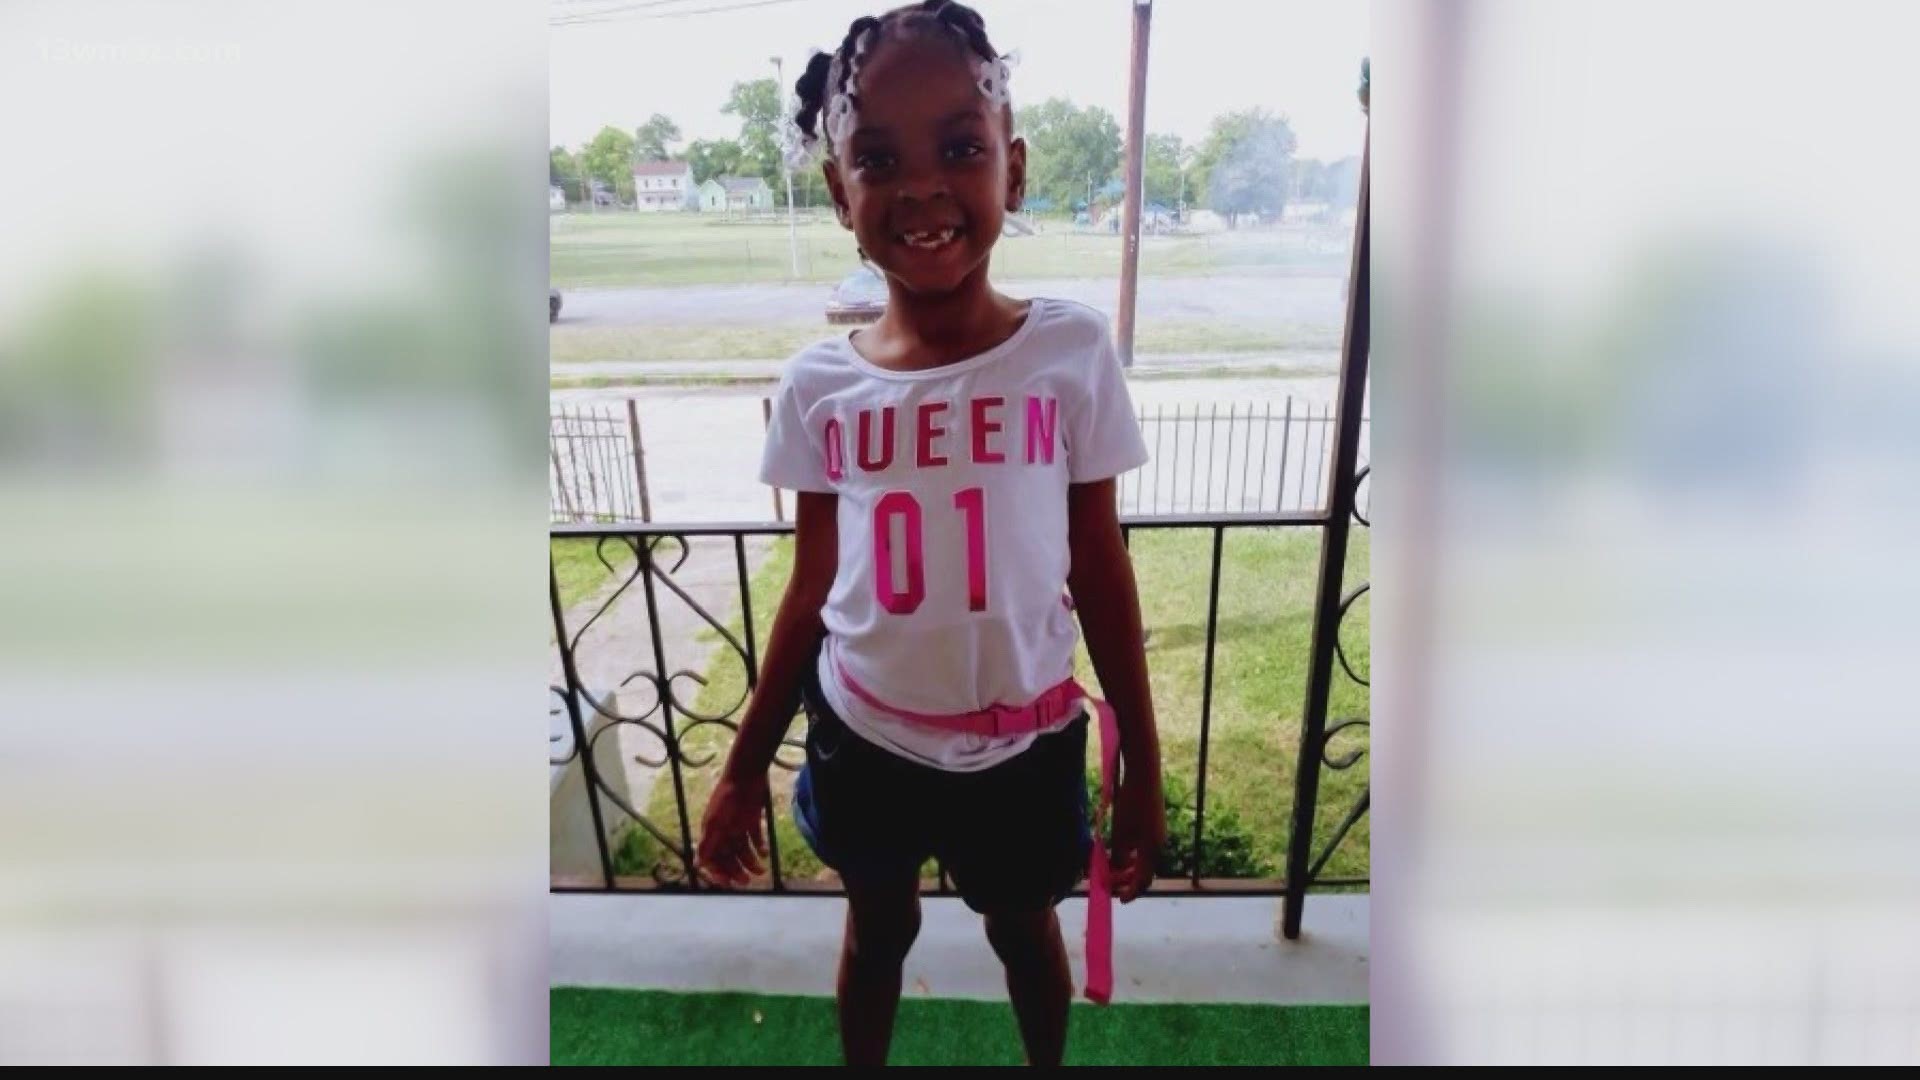 A Bibb County Sheriff’s Office incident report fills in some of the blanks on what led up to Friday's fatal shooting of an 8-year-old girl.